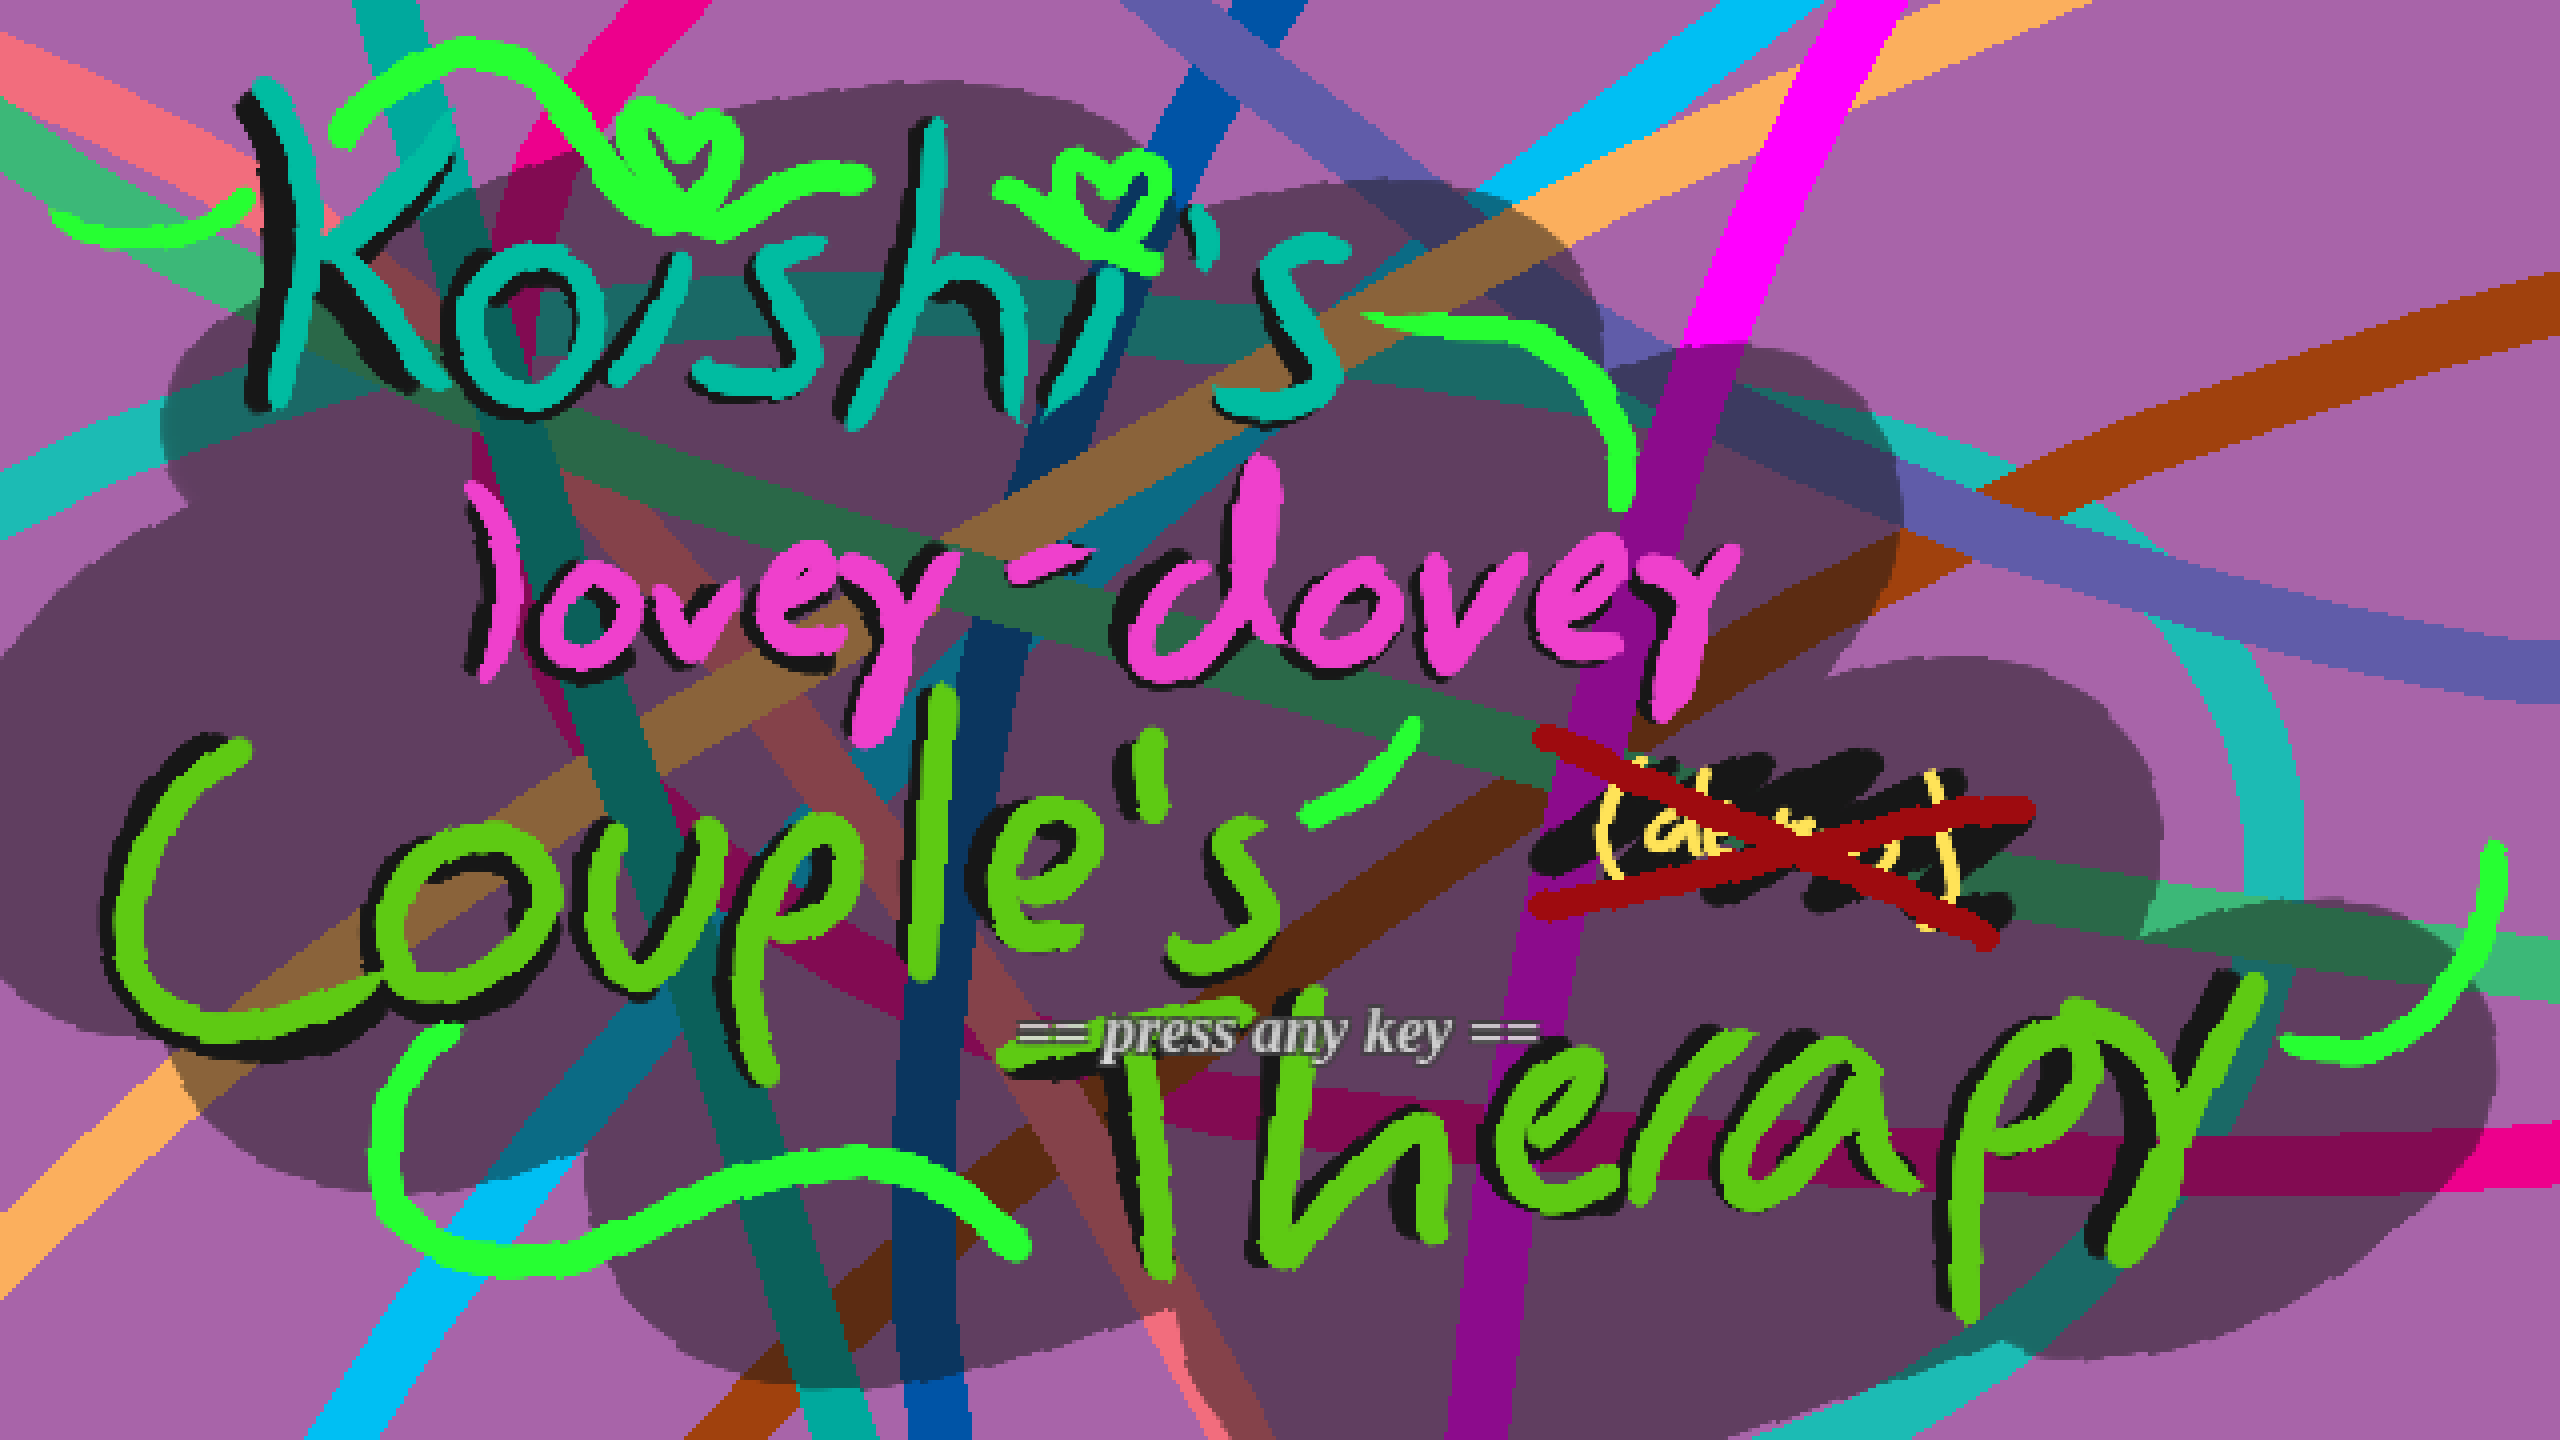 koishi's lovey-dovey couple's therapy